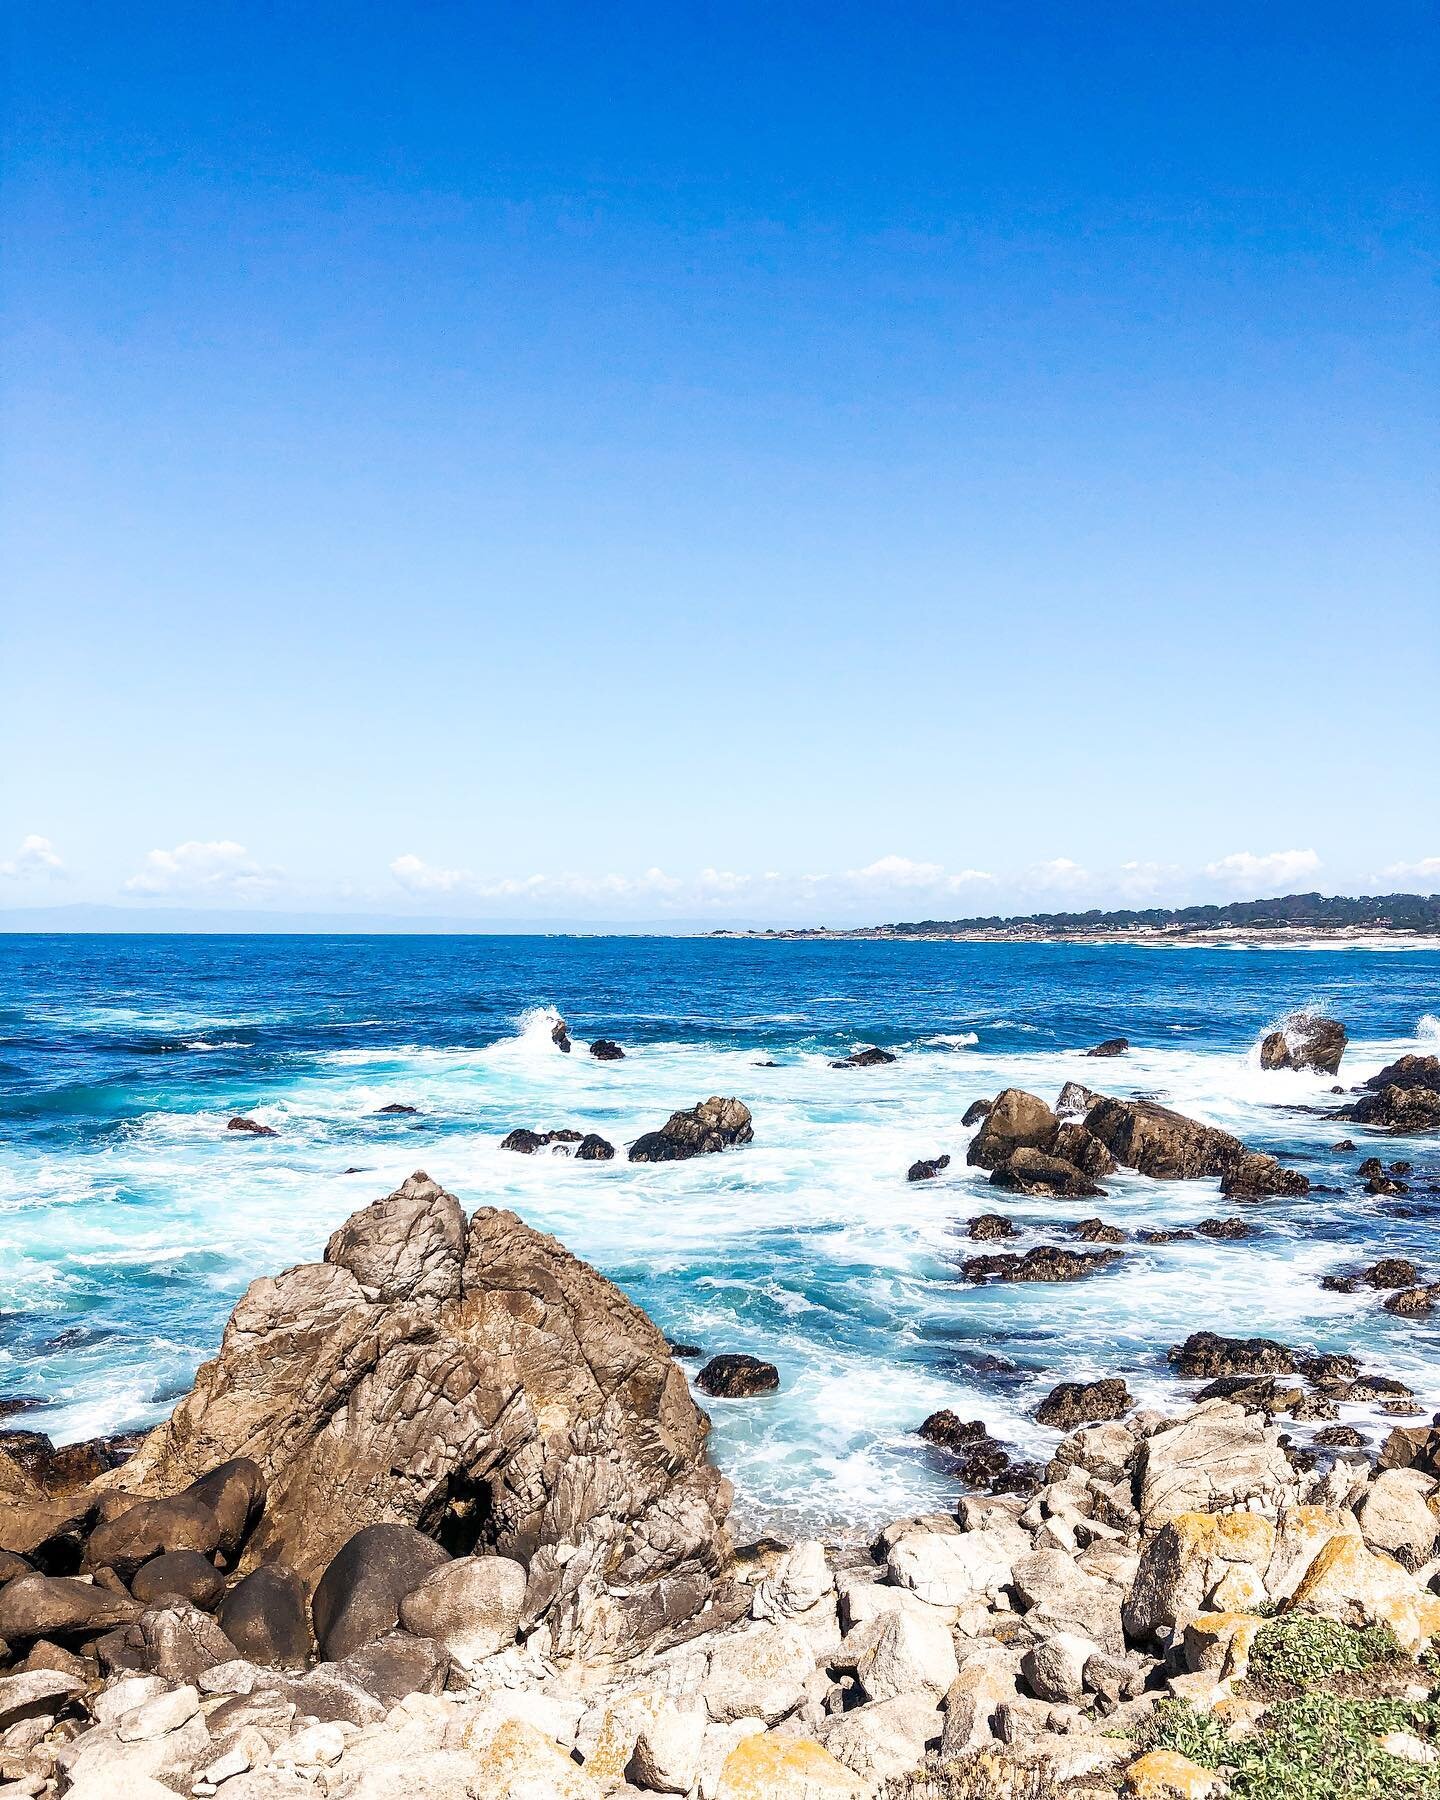 We explored the 17 mile drive today and were blown away by the sites!! The most epic teal blue waters, super interesting history stories from the area, sun bathing seals and their pups and the cool Lone Pine. We finished our drive with lunch at the u